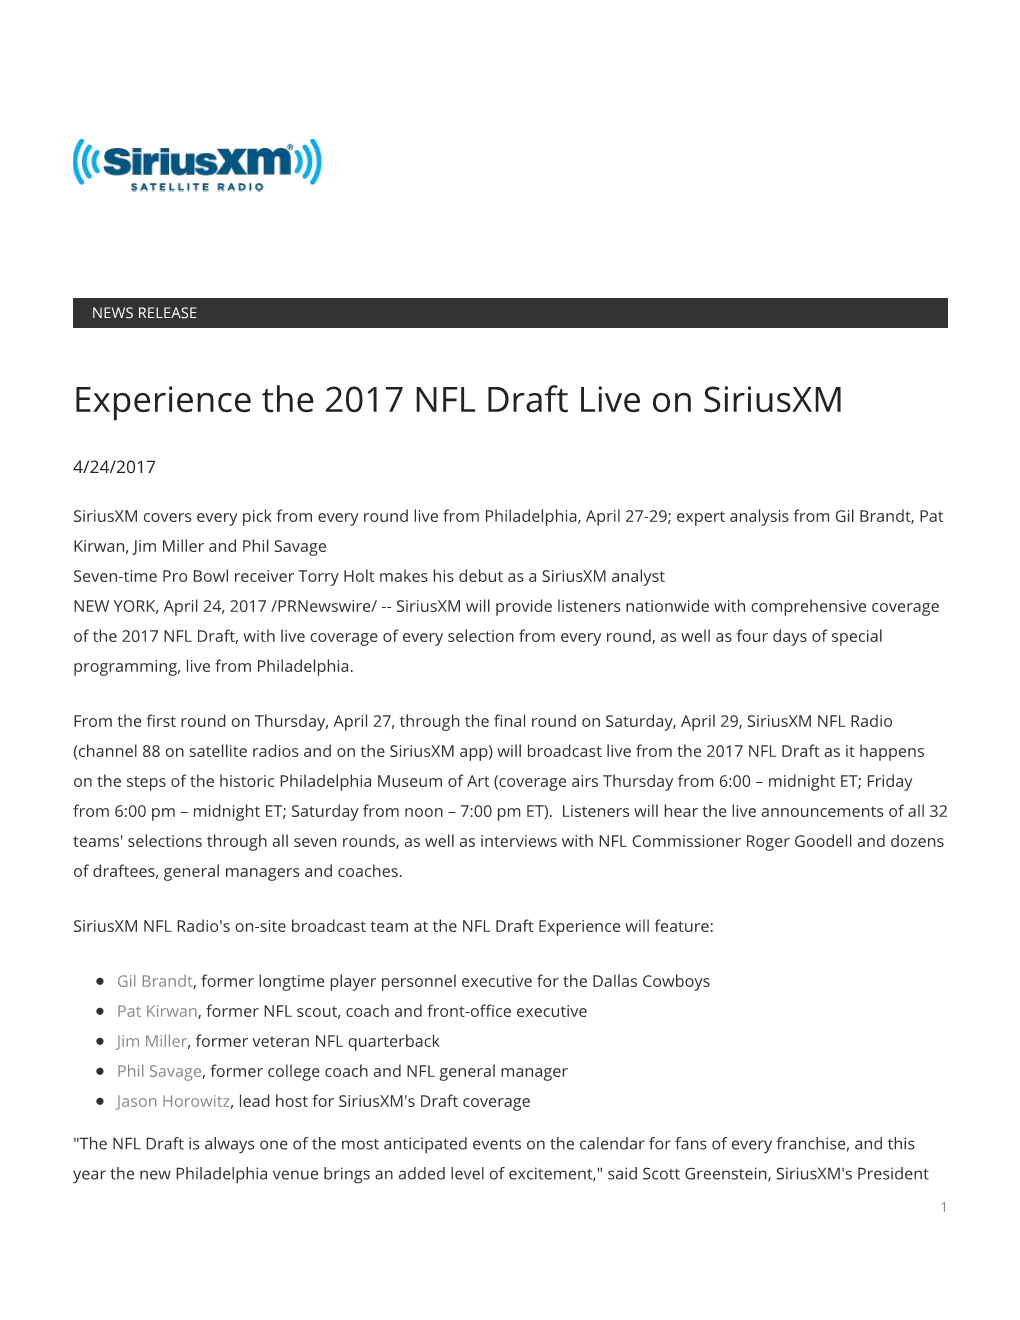 Experience the 2017 NFL Draft Live on Siriusxm